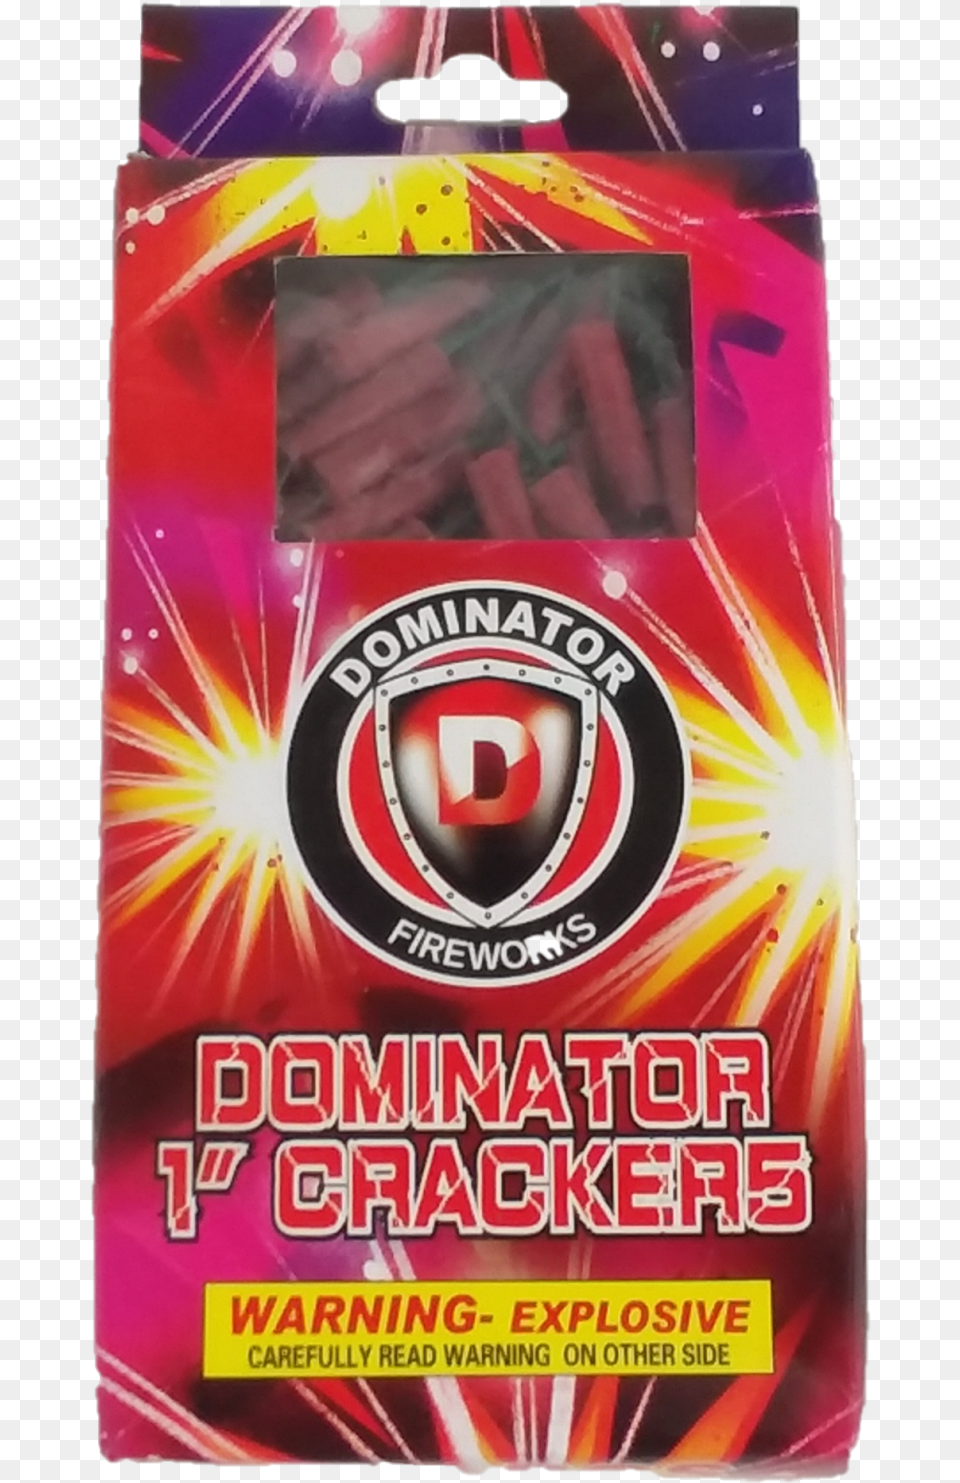 Dominator 1 Inch Firecrackers Fireworks, Can, Tin, Gum Free Transparent Png